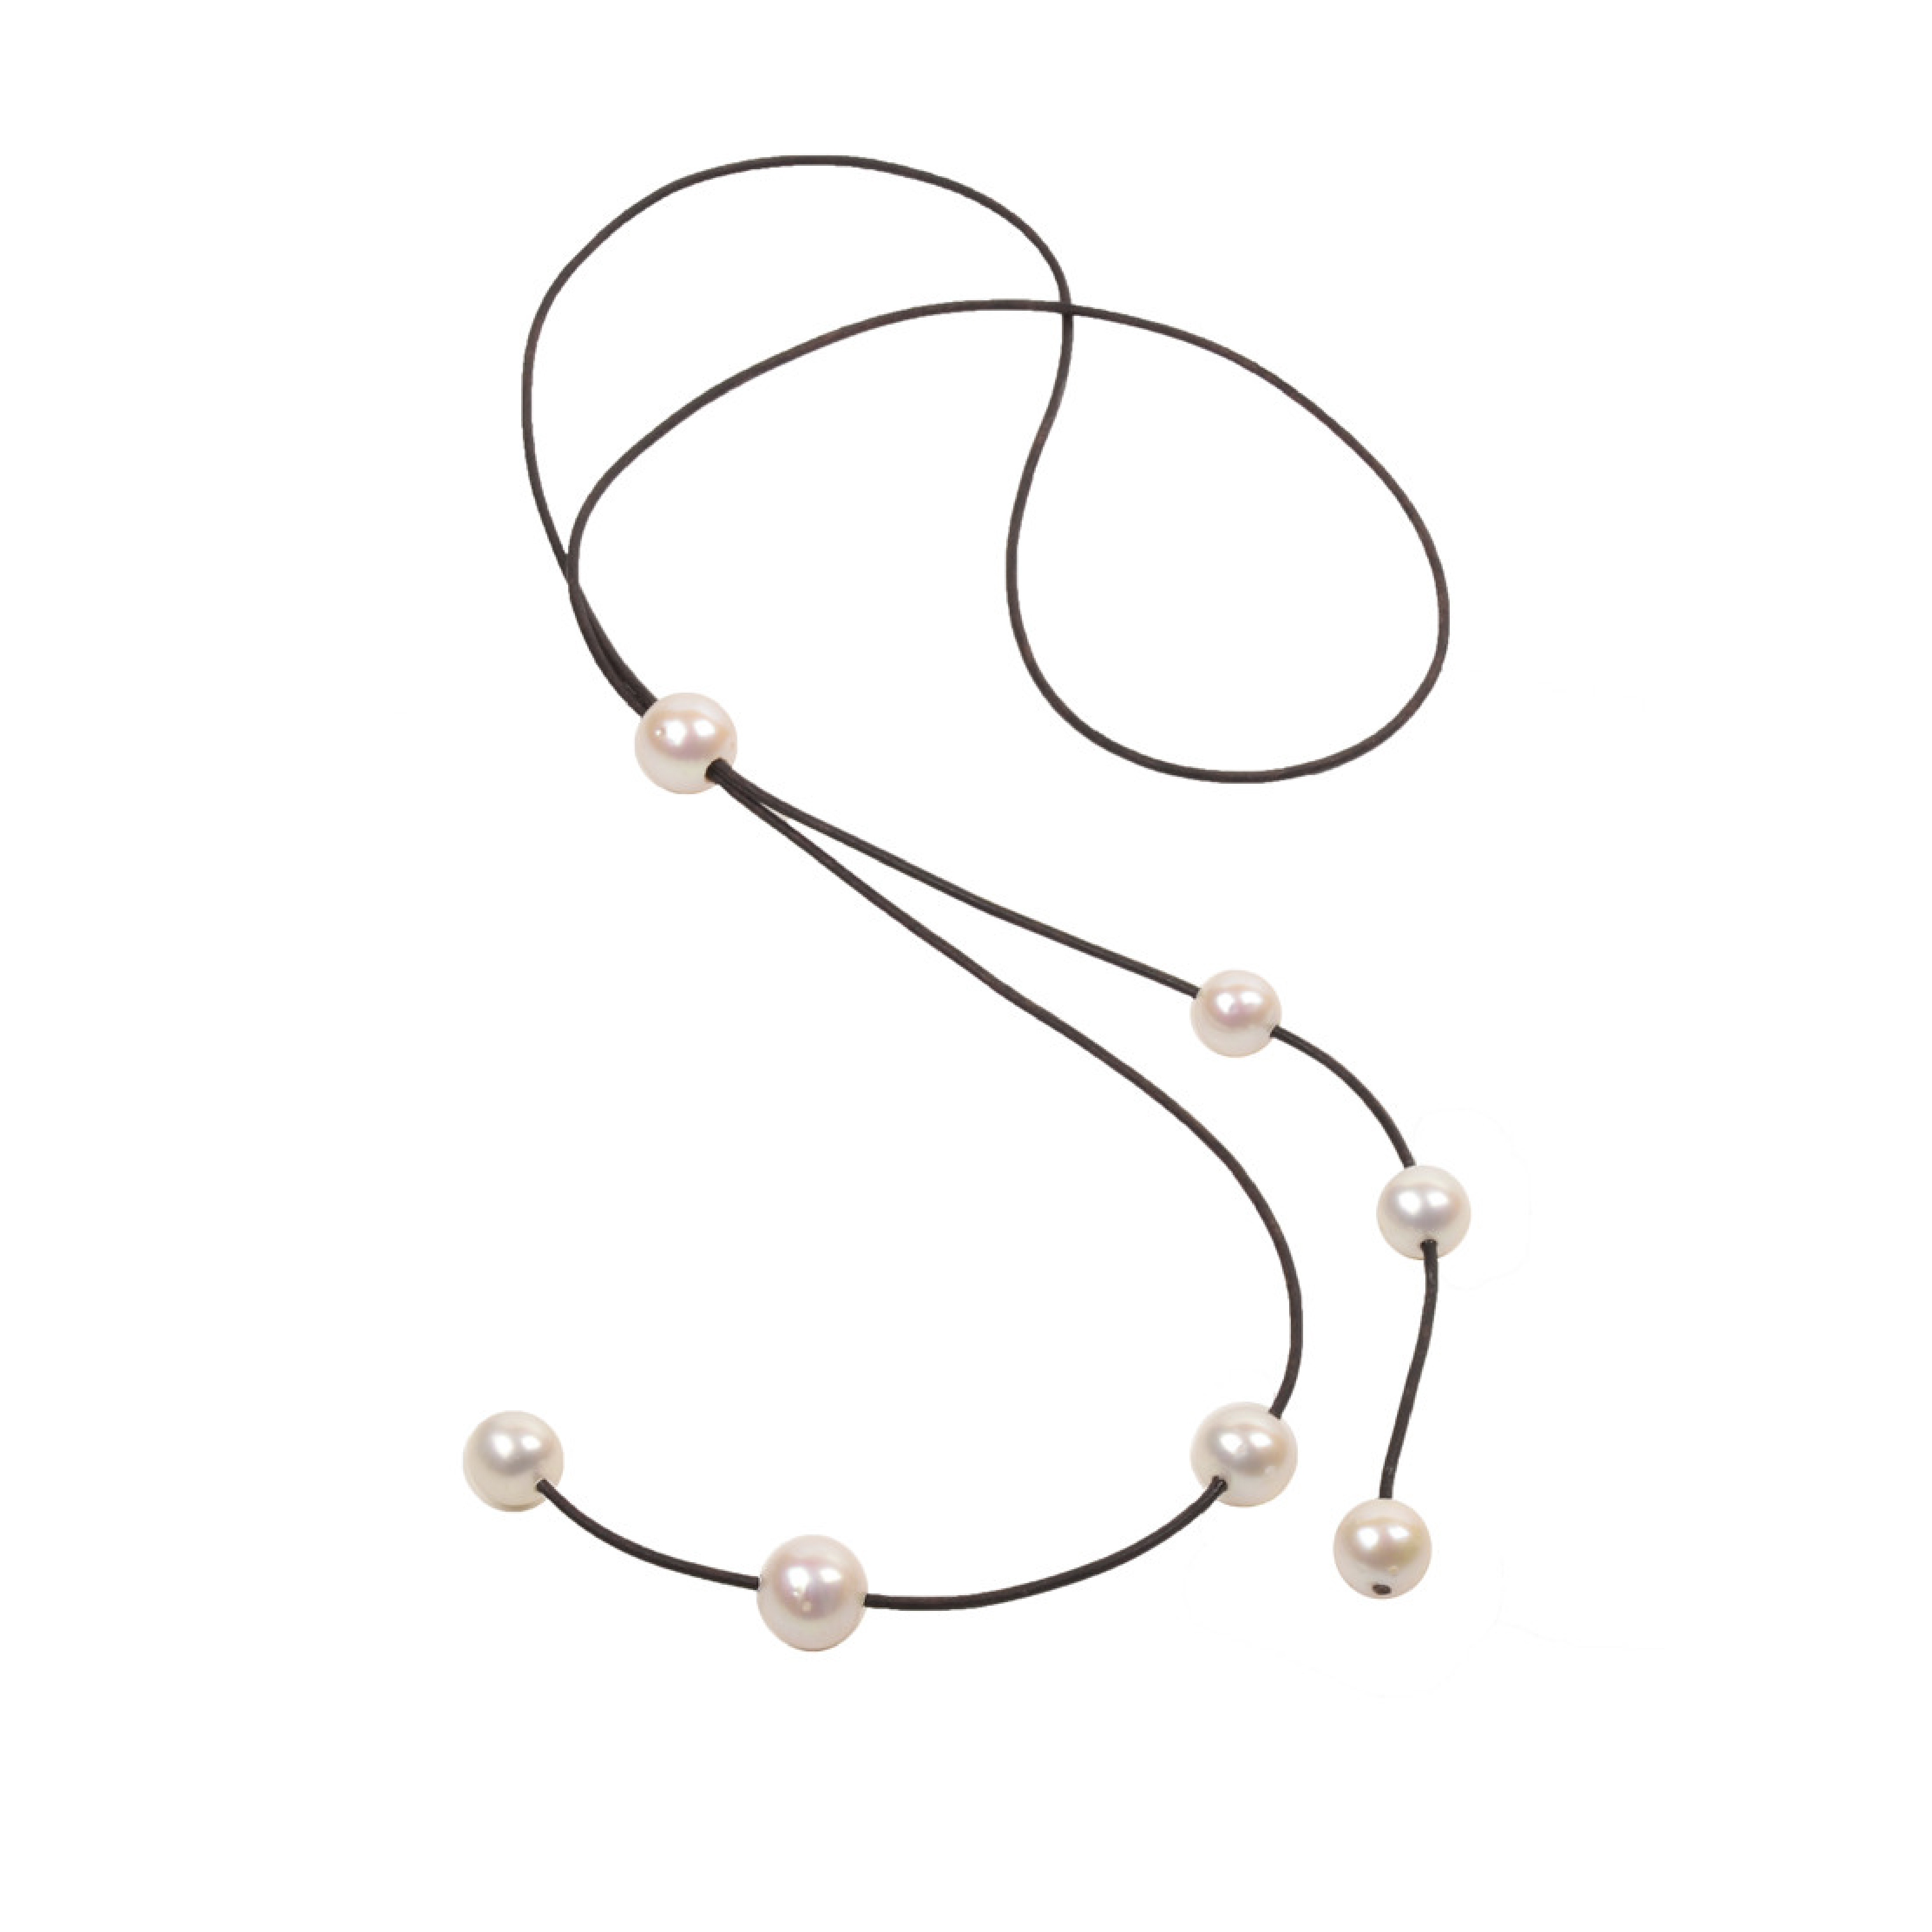 VINCENT PEACH BOLO CASCADE NECKLACE 7 & 14MM FRESHWATER PEARLS ON PREMIUM LEATHER